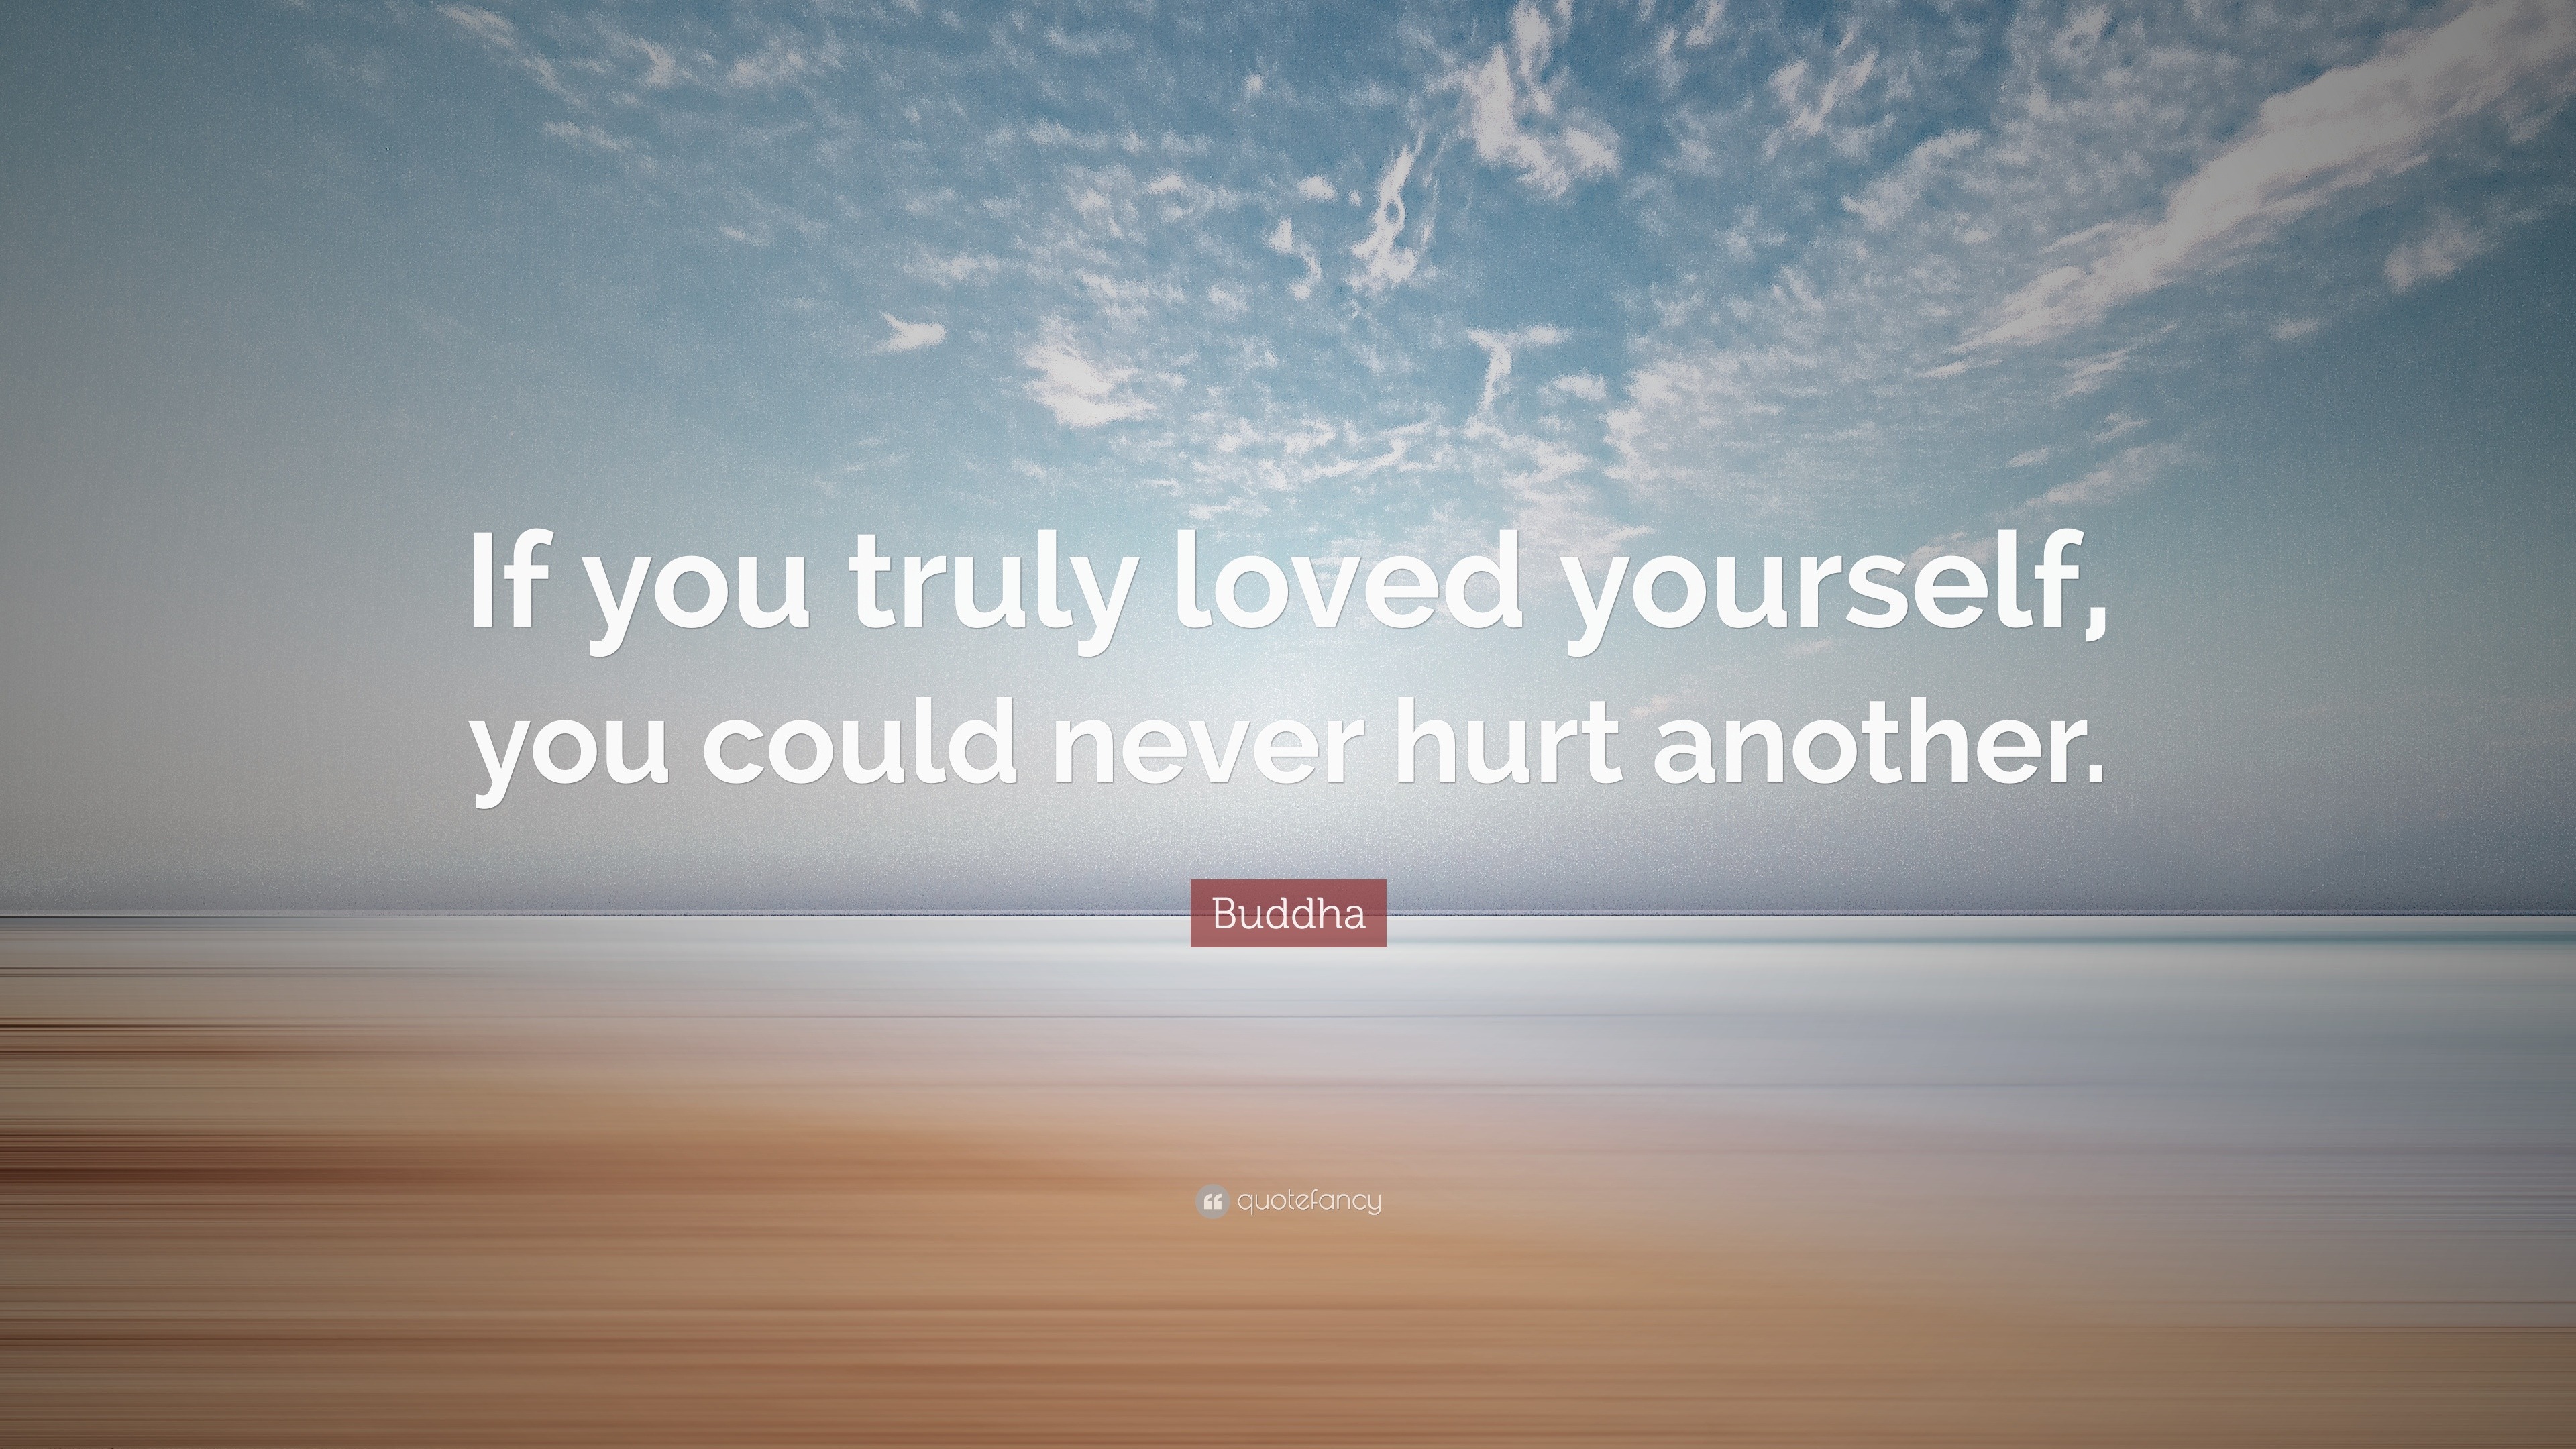 Buddha Quote: “If you truly loved yourself, you could never hurt another.”